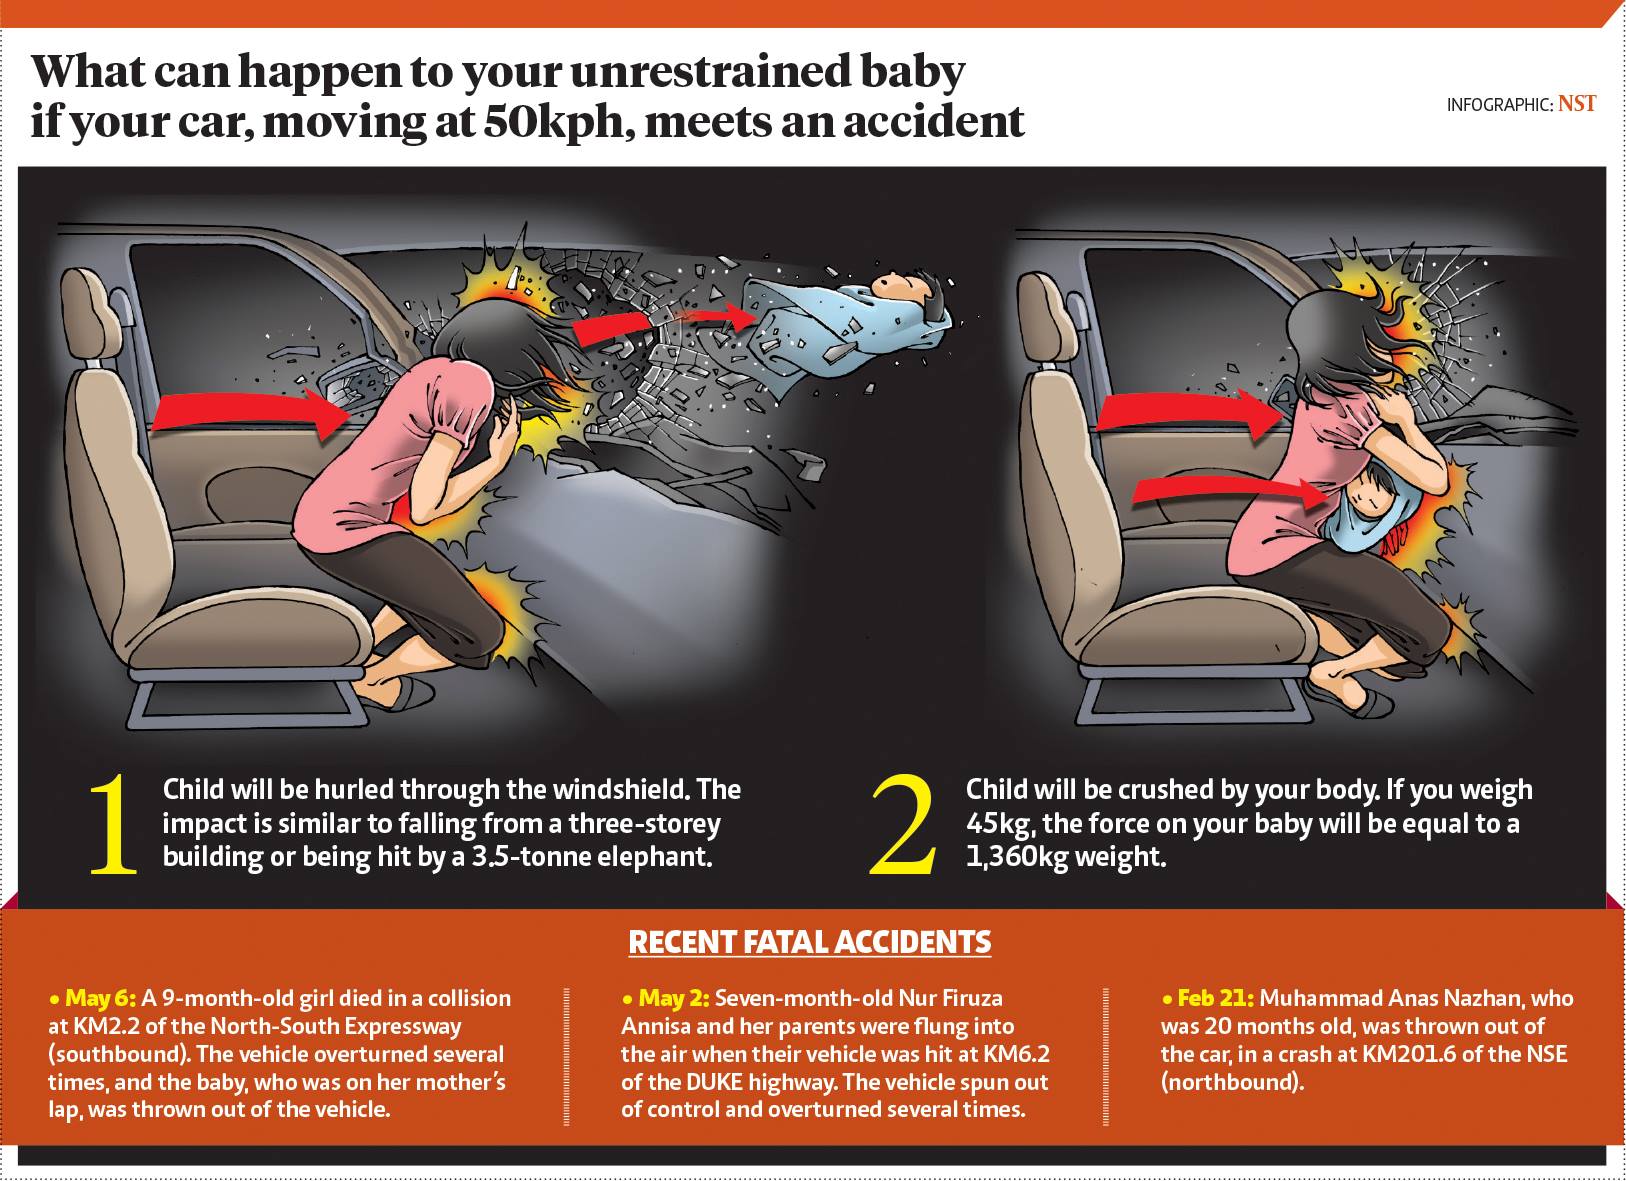 Know more about Child Passenger Safety